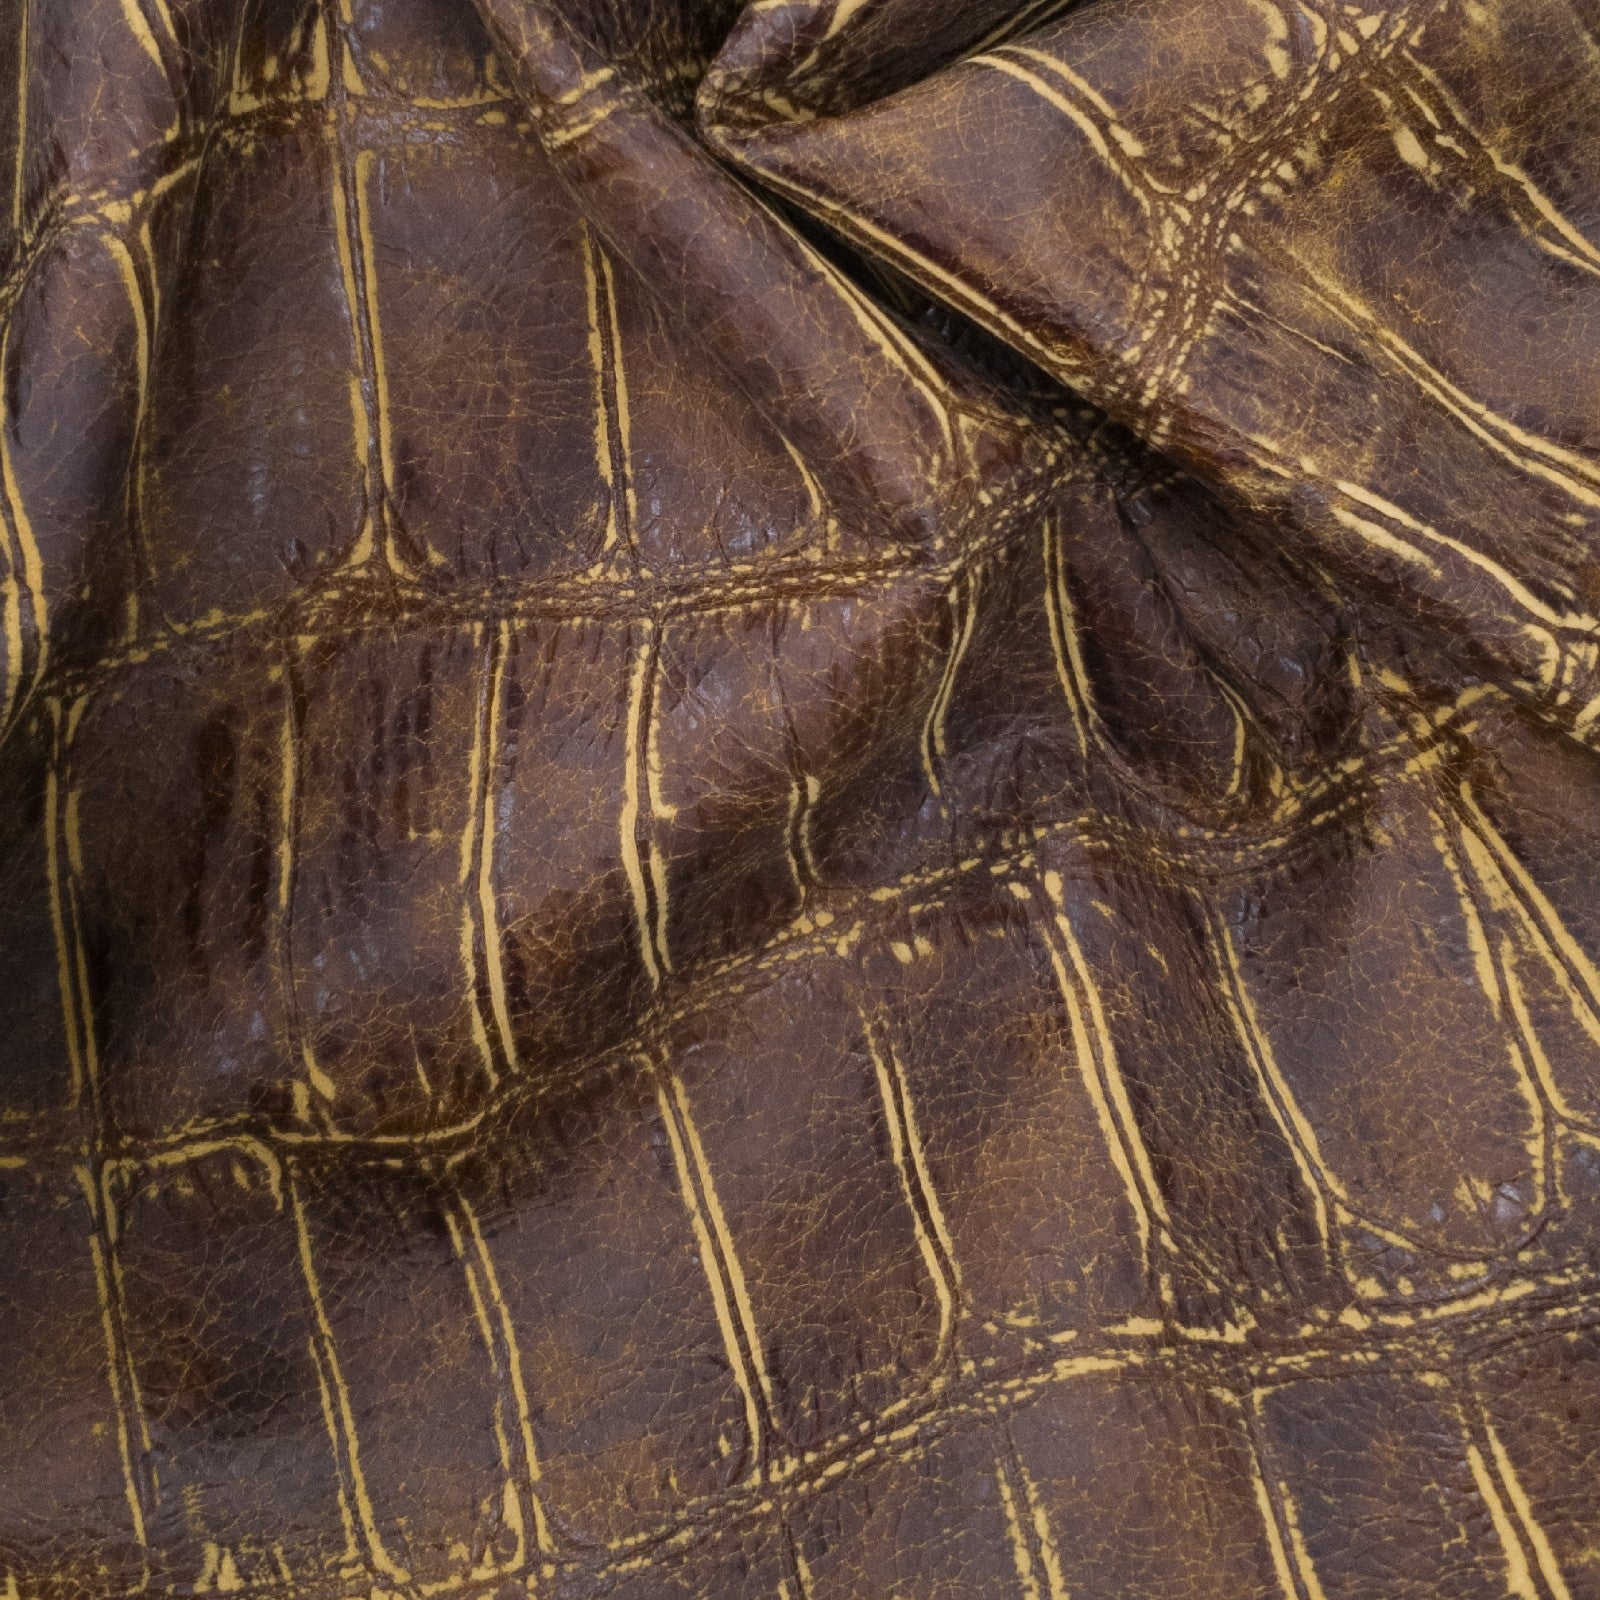 Croc Embossed, 3-4 oz, 7-25 sq ft, Cow Sides, Rustic Croc- Cognac / 6.5-7.5 Sq Ft (Top) | The Leather Guy